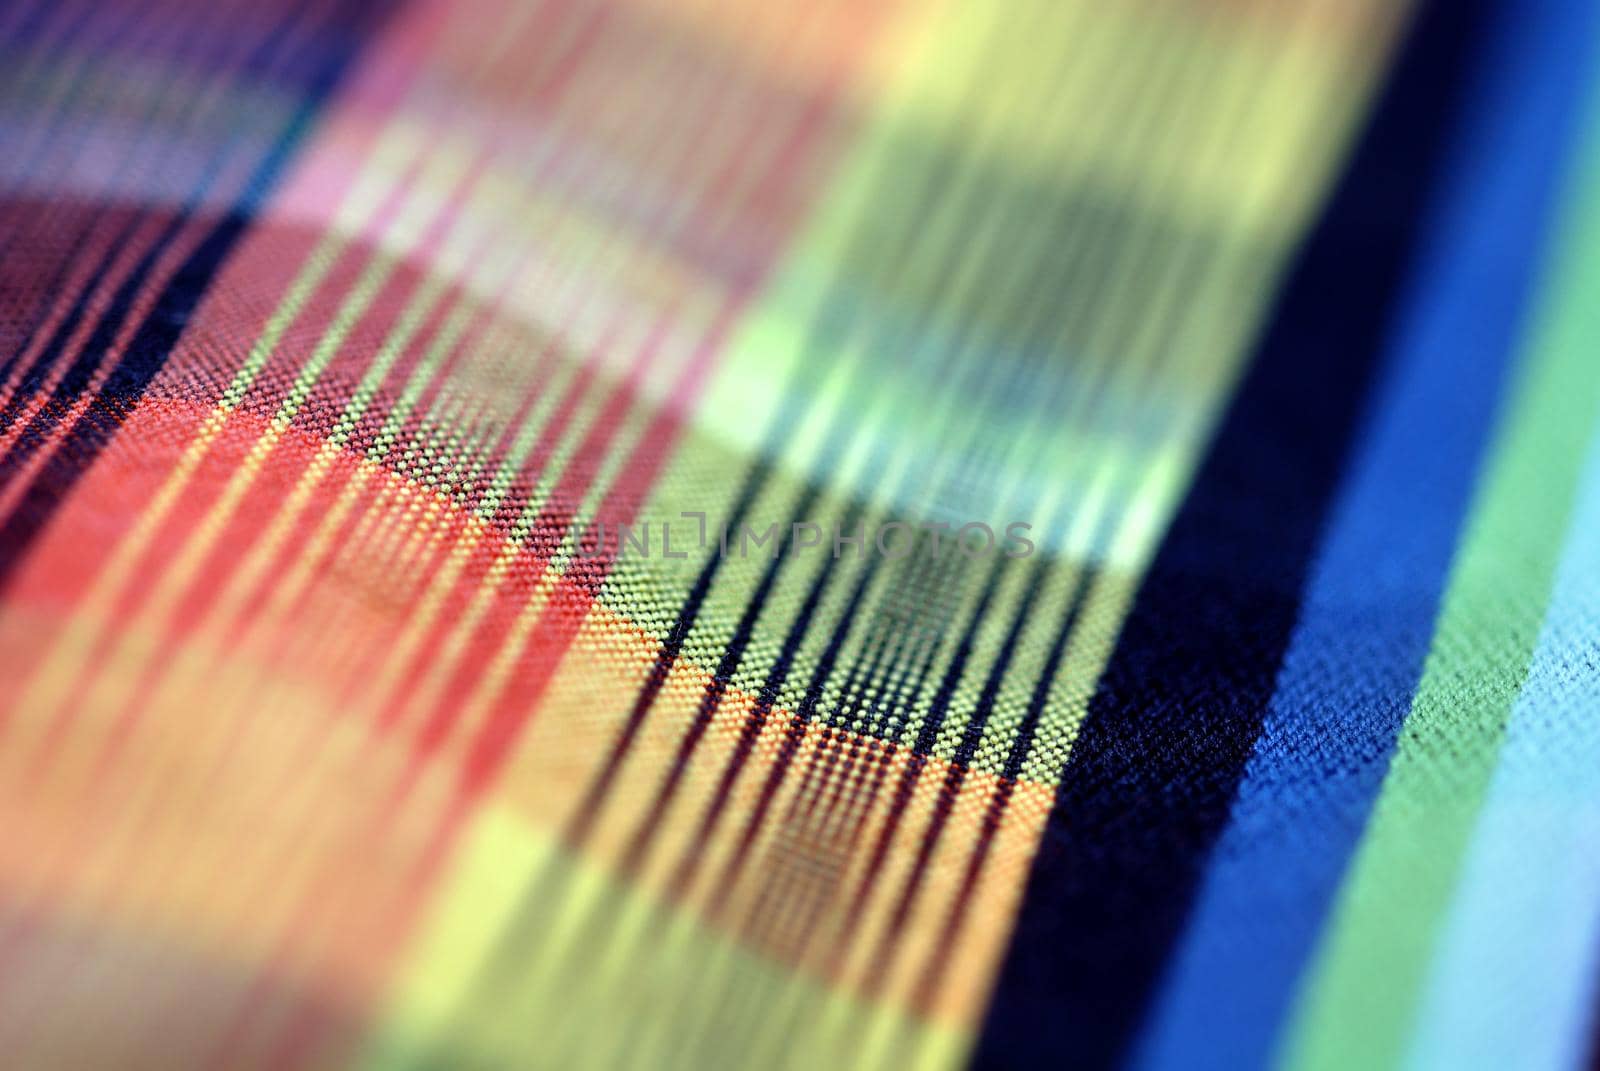 Colorful tablecloth by dotshock